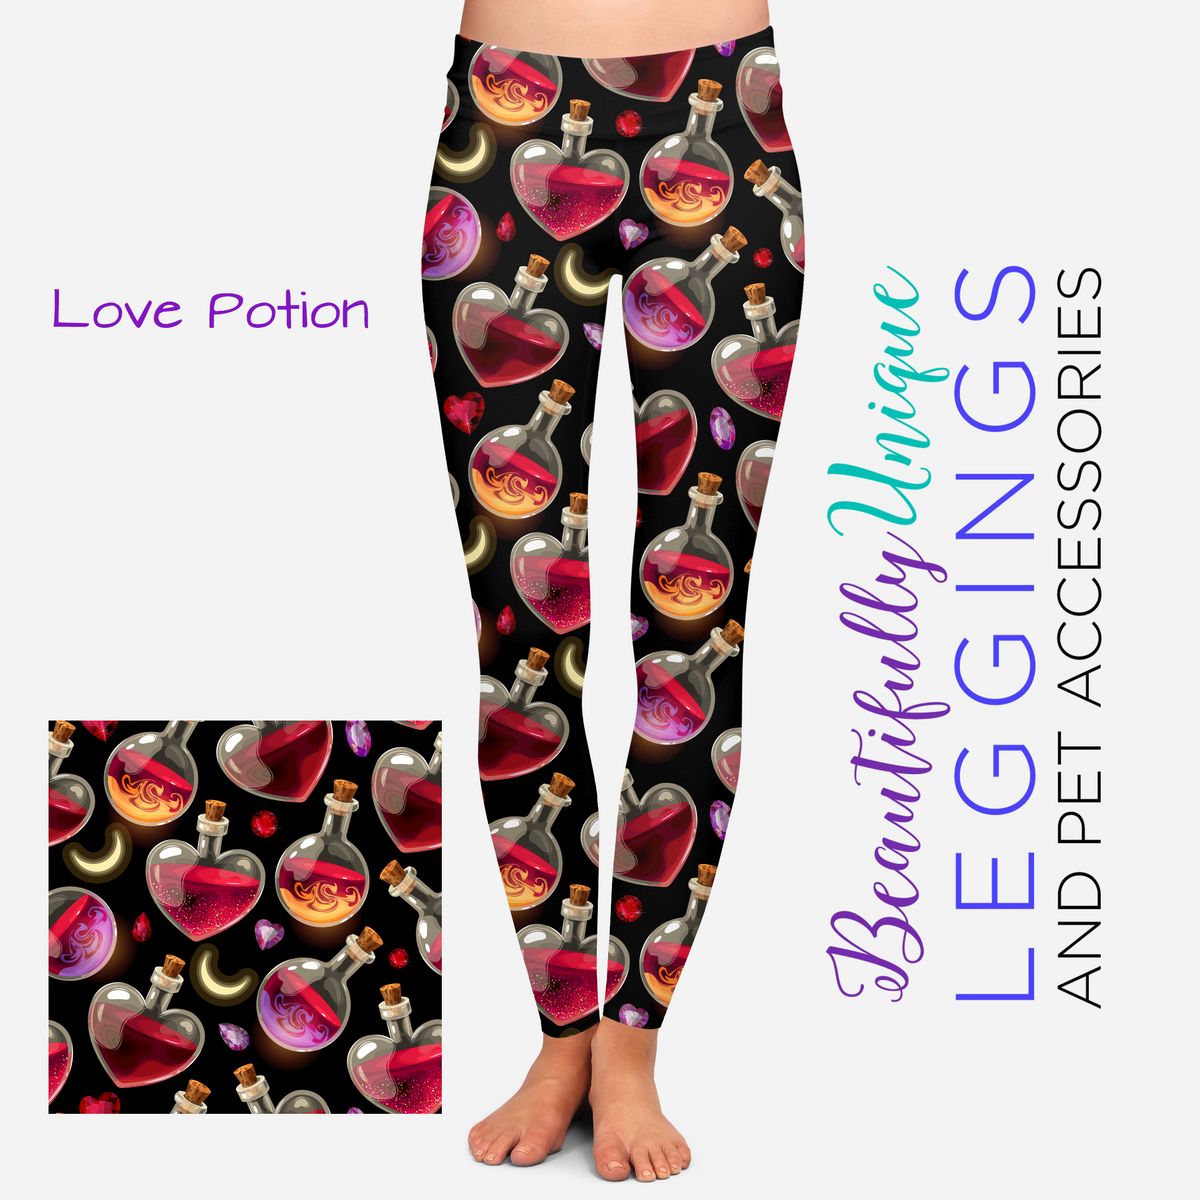 Love Potion - High-quality Handcrafted Vibrant Leggings